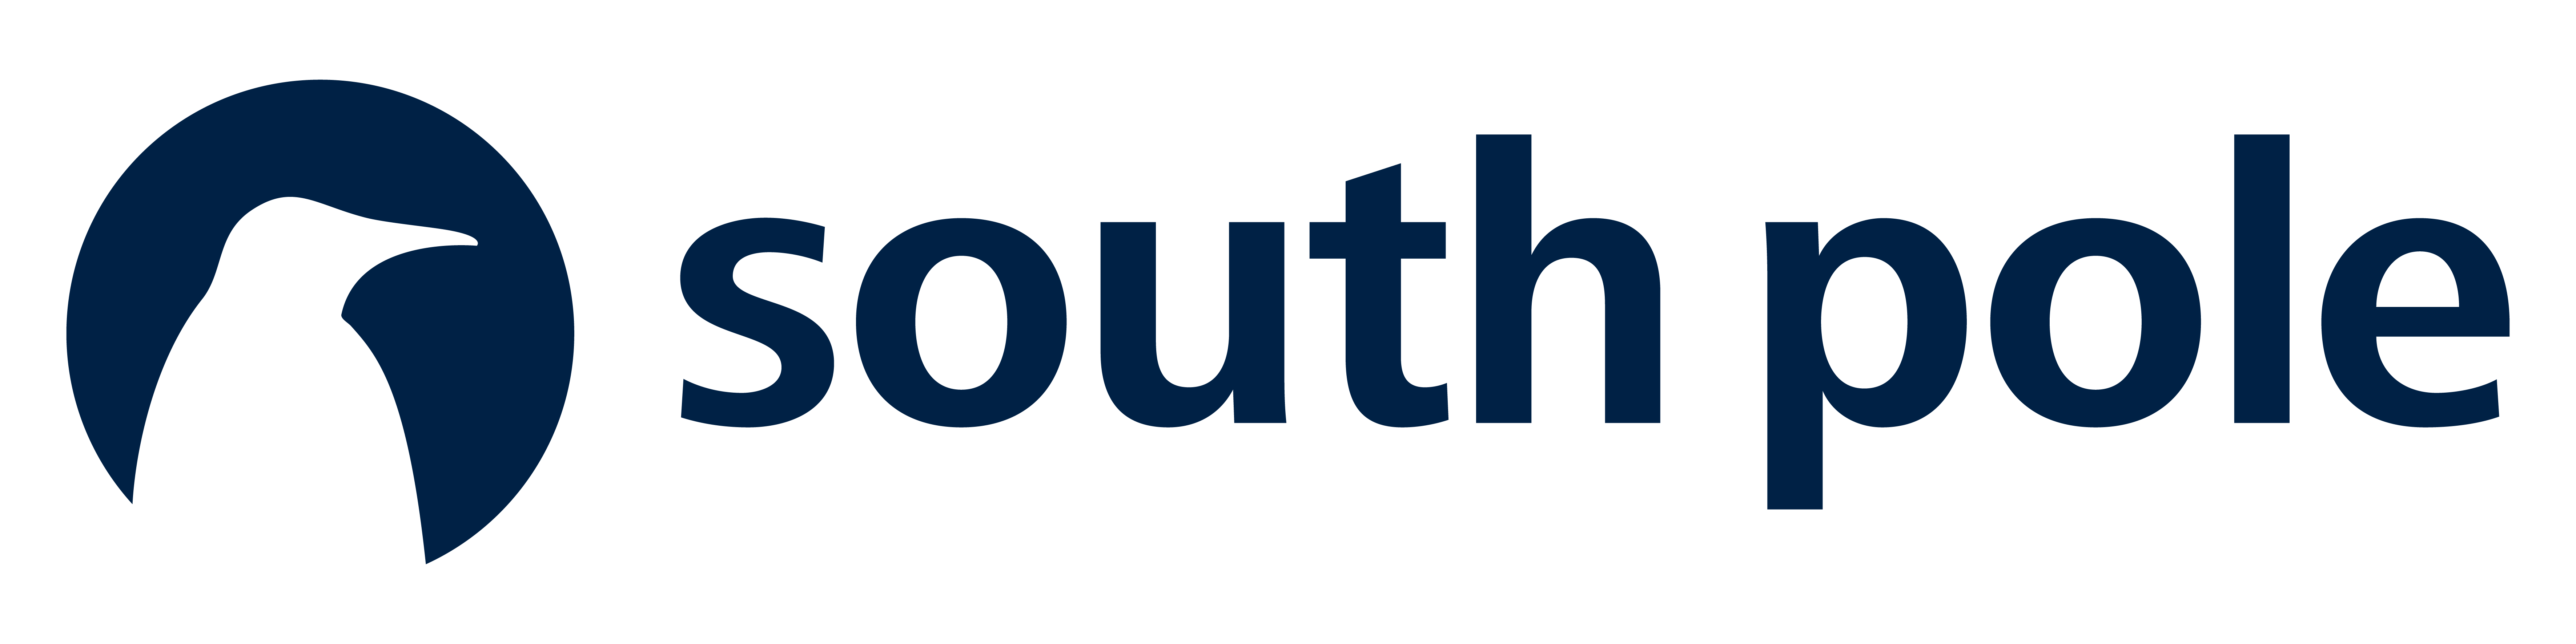 southpole_logos_primary.png